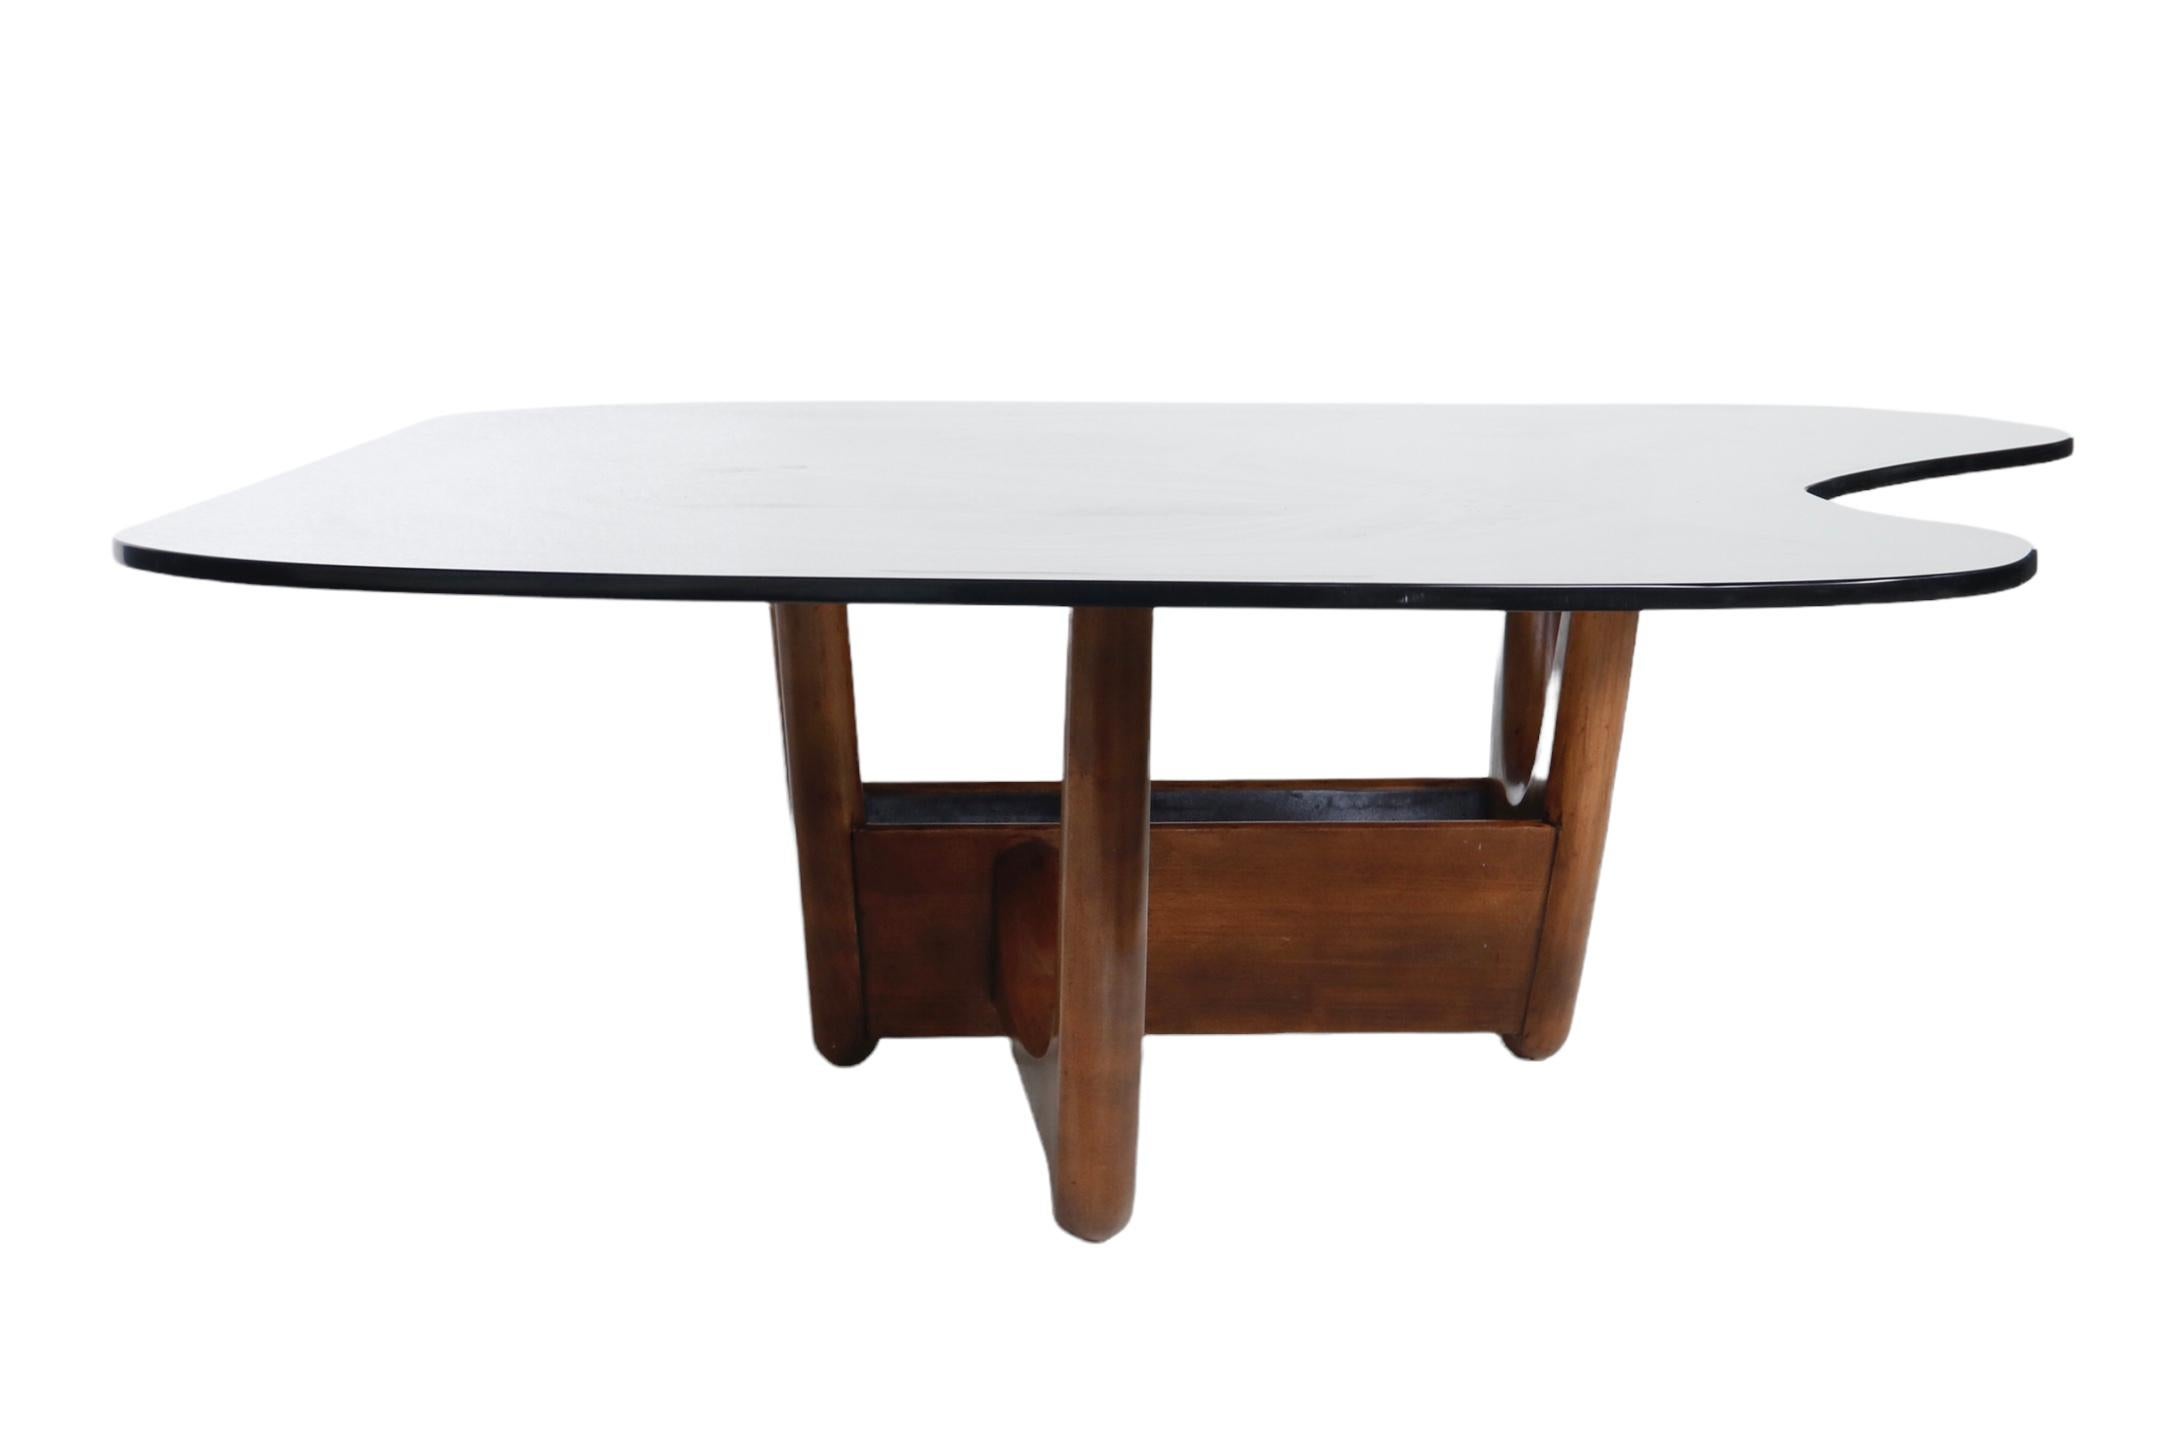 Adrian Pearsall coffee table having a wood base and a custom amoeba-shaped smoked glass top. 

USA, circa 1960.

Base may be used in two ways as shown.

Dimensions:
Overall/Top: 54.5 inches L x 40.5 inches D x 15 inches H
Base: 34 inches L x 20